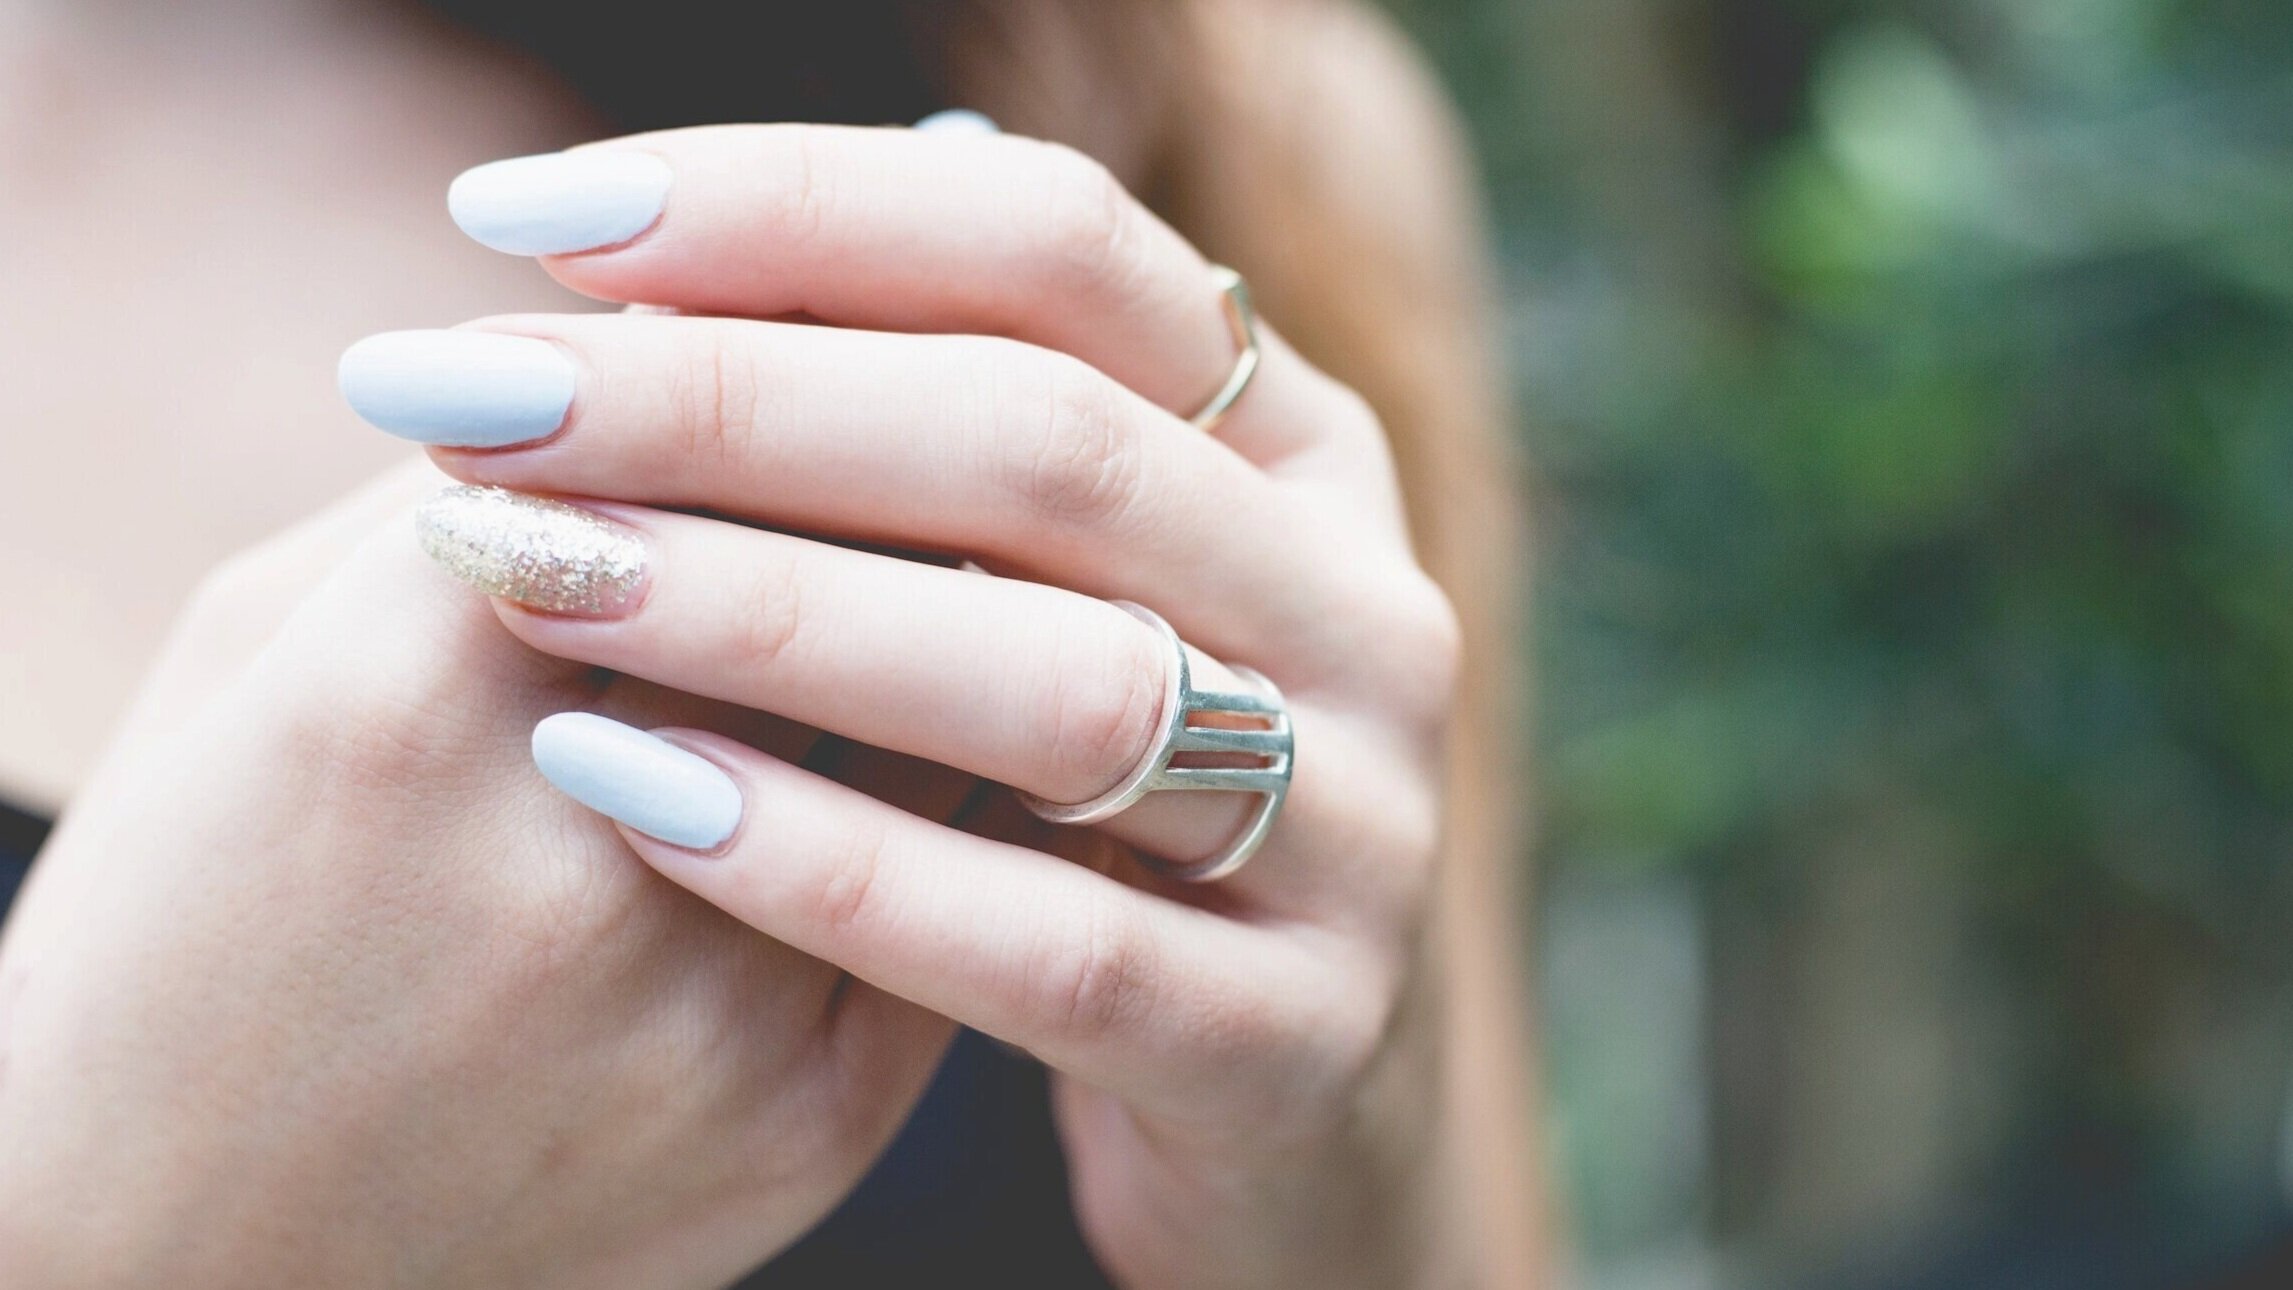 27 Barely There Nail Designs For Any Skin Tone : Clean Sheer Short Nails